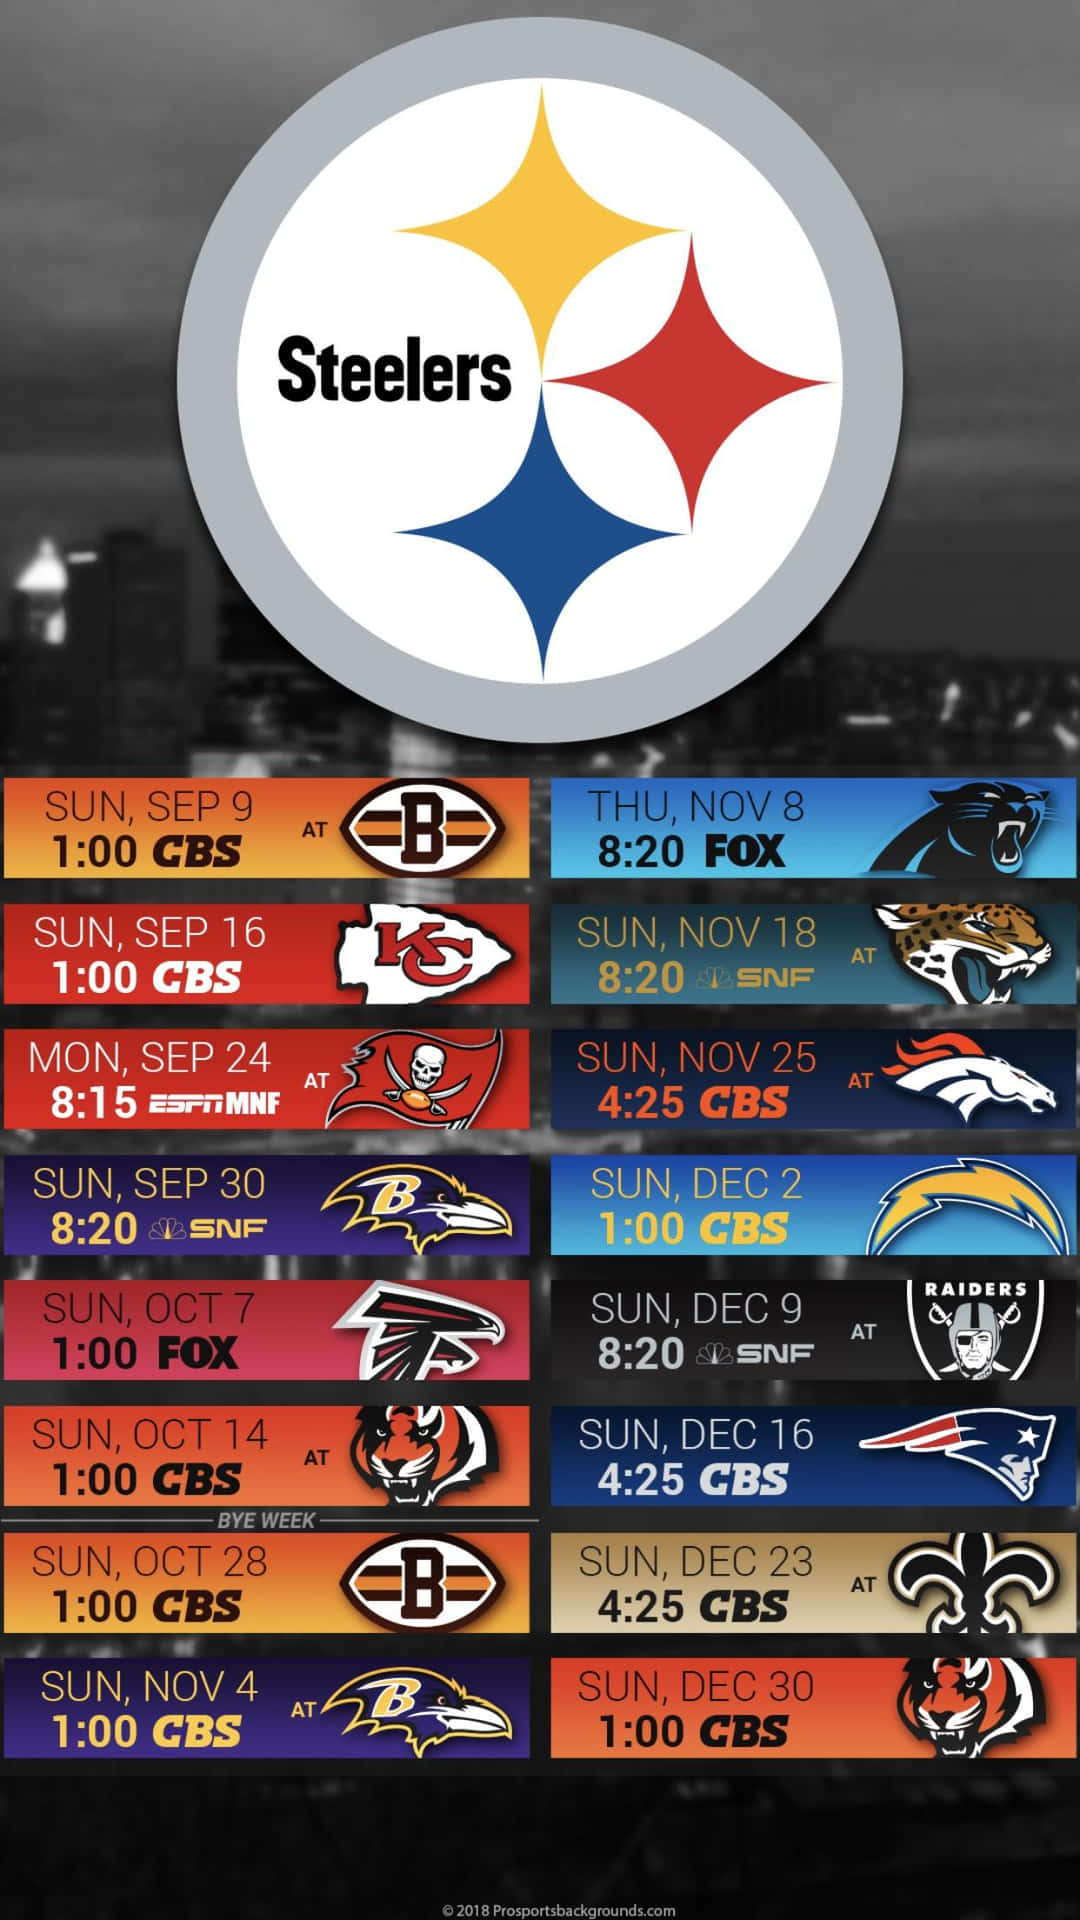 Stay up-to-date with the latest from the Steelers on your iPhone Wallpaper